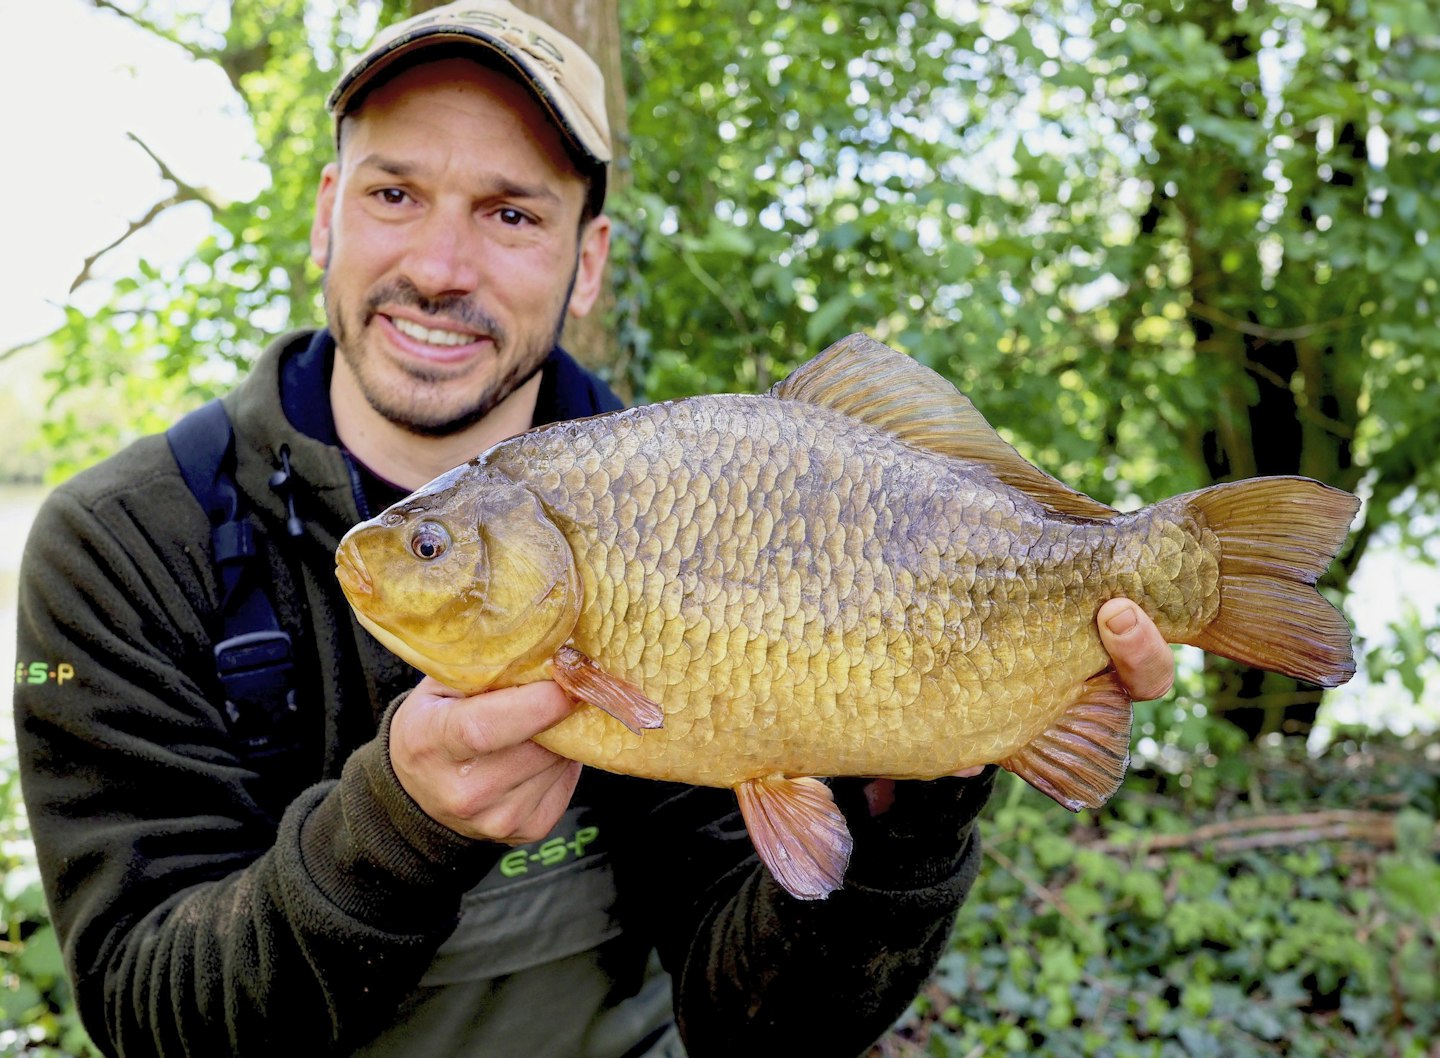 Dan with his new PB crucian weighing 4lb, caught on these exact tactics.